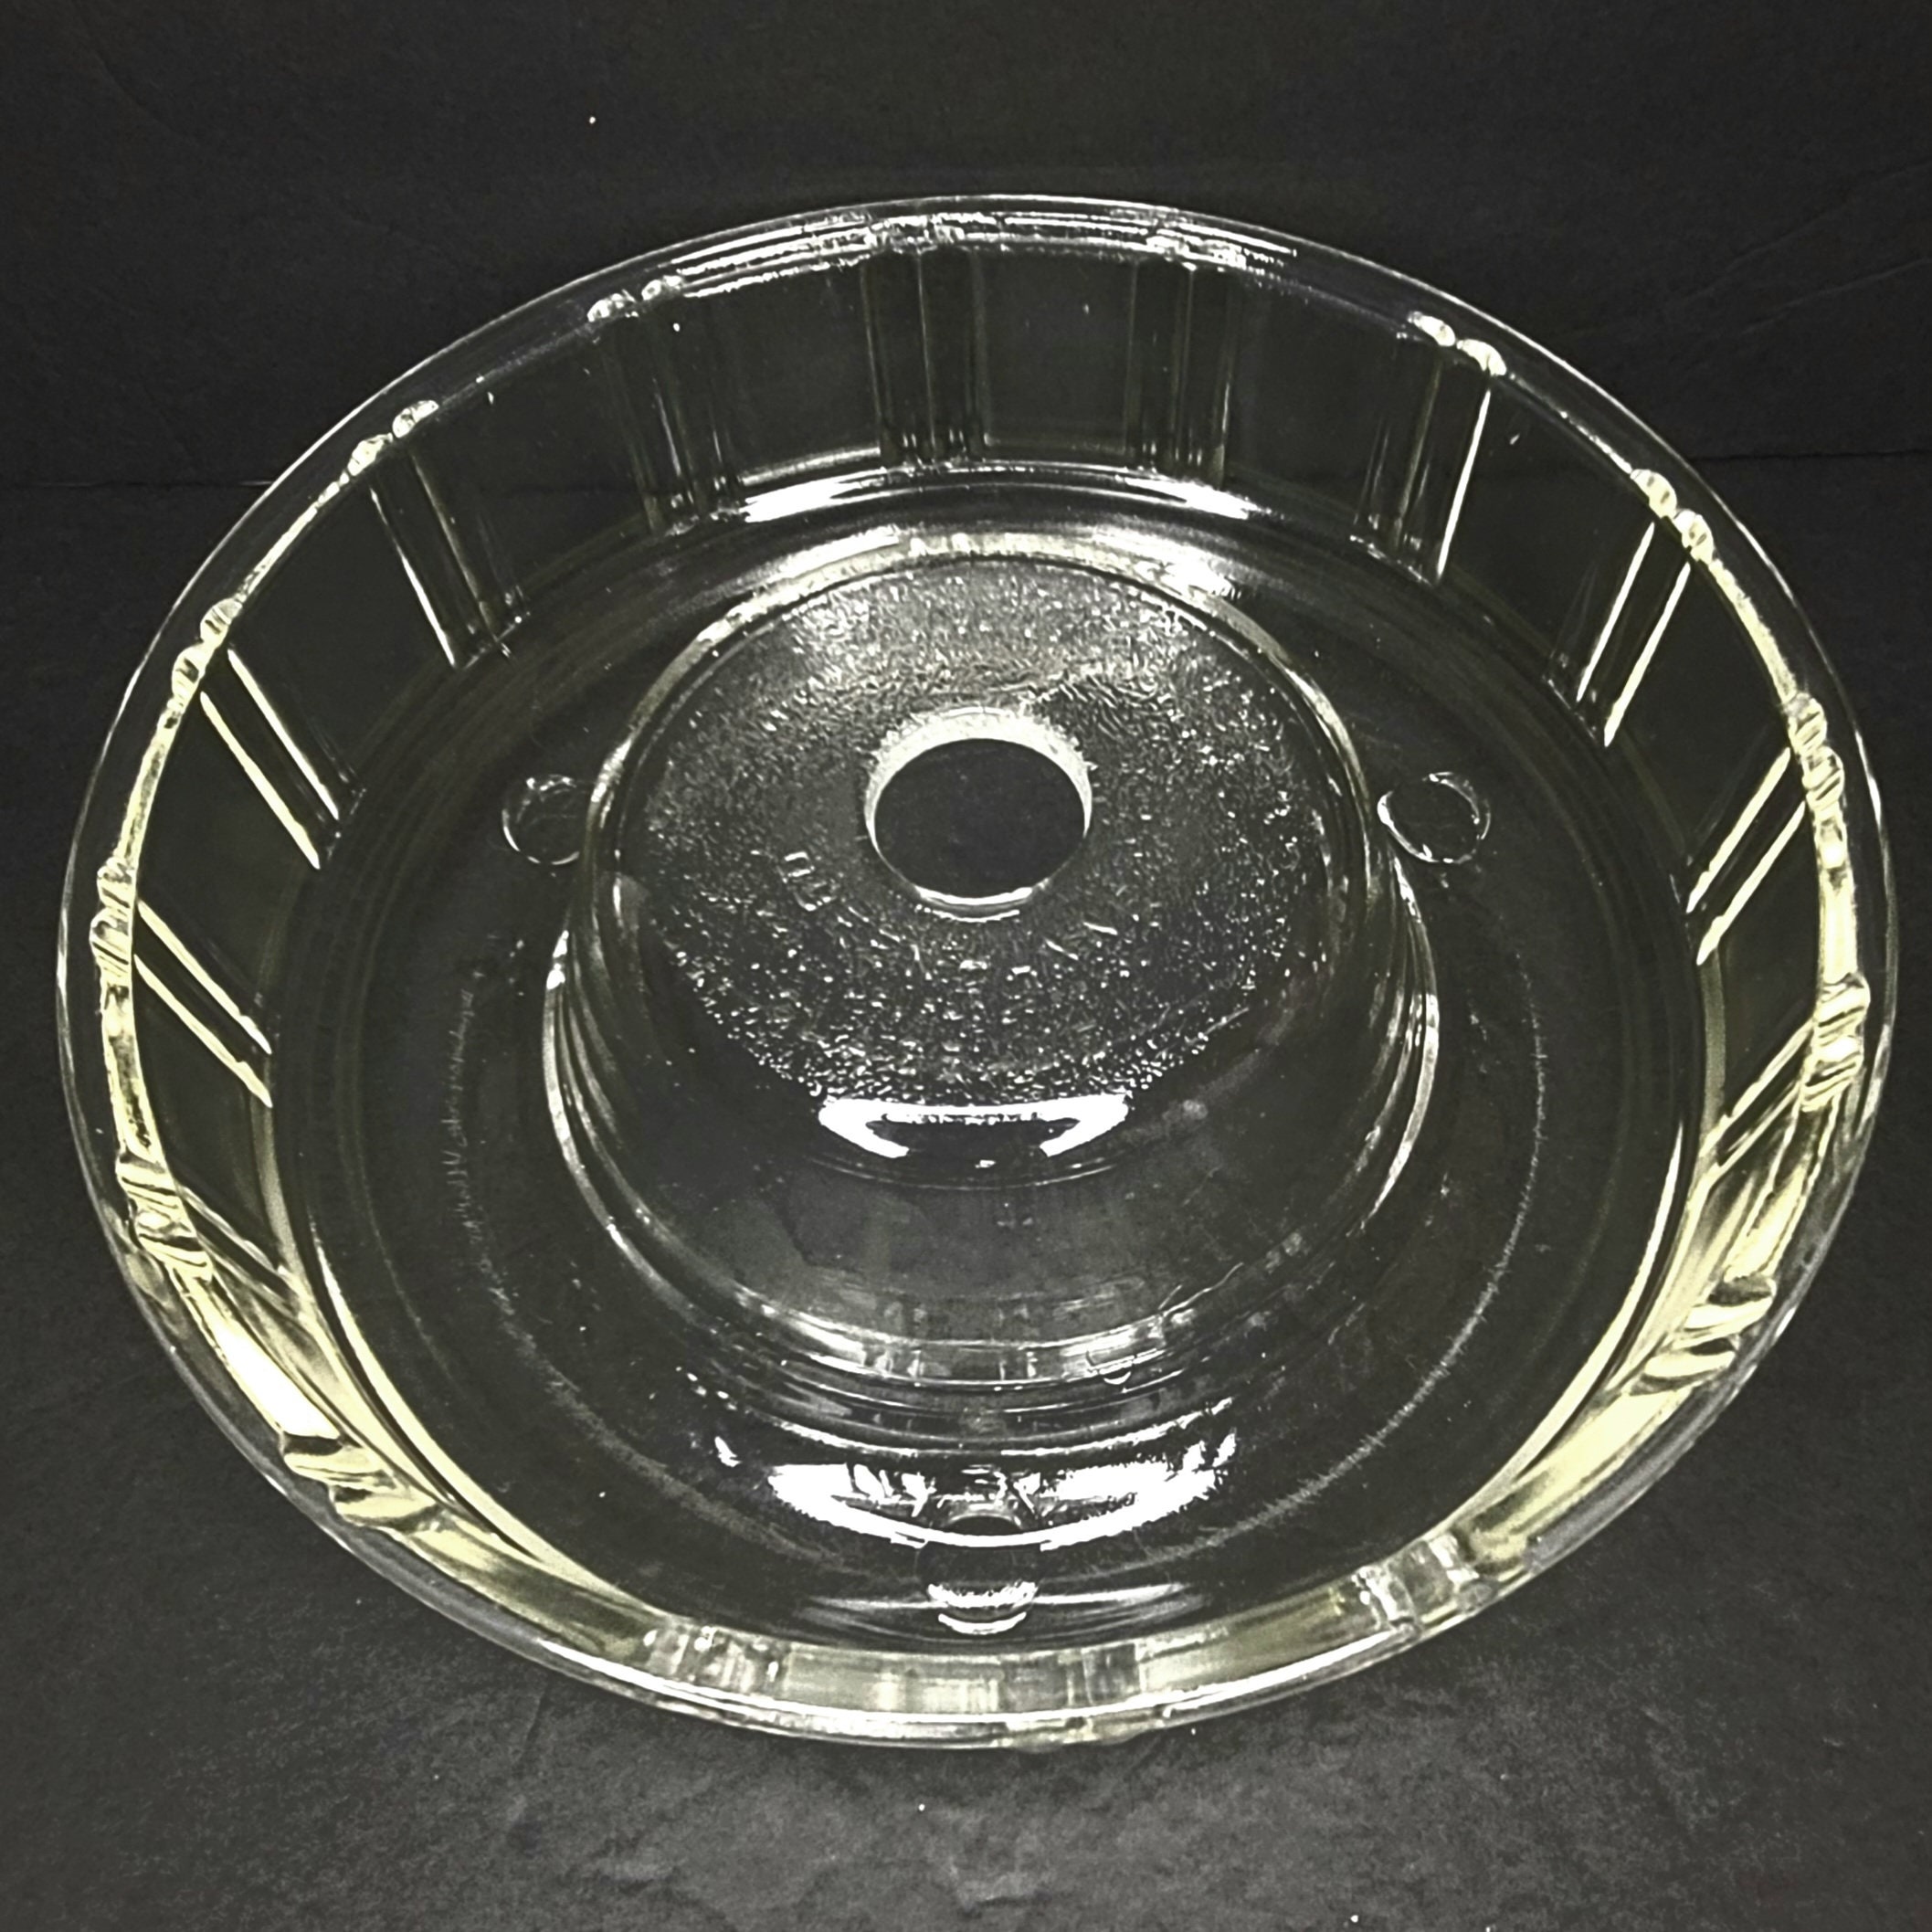 Vintage Glasbake Crown glass cake pan. Bundt cake size, measuring 9 1/2” in  diameter. I love this piece of nostalgia. The patina of the…